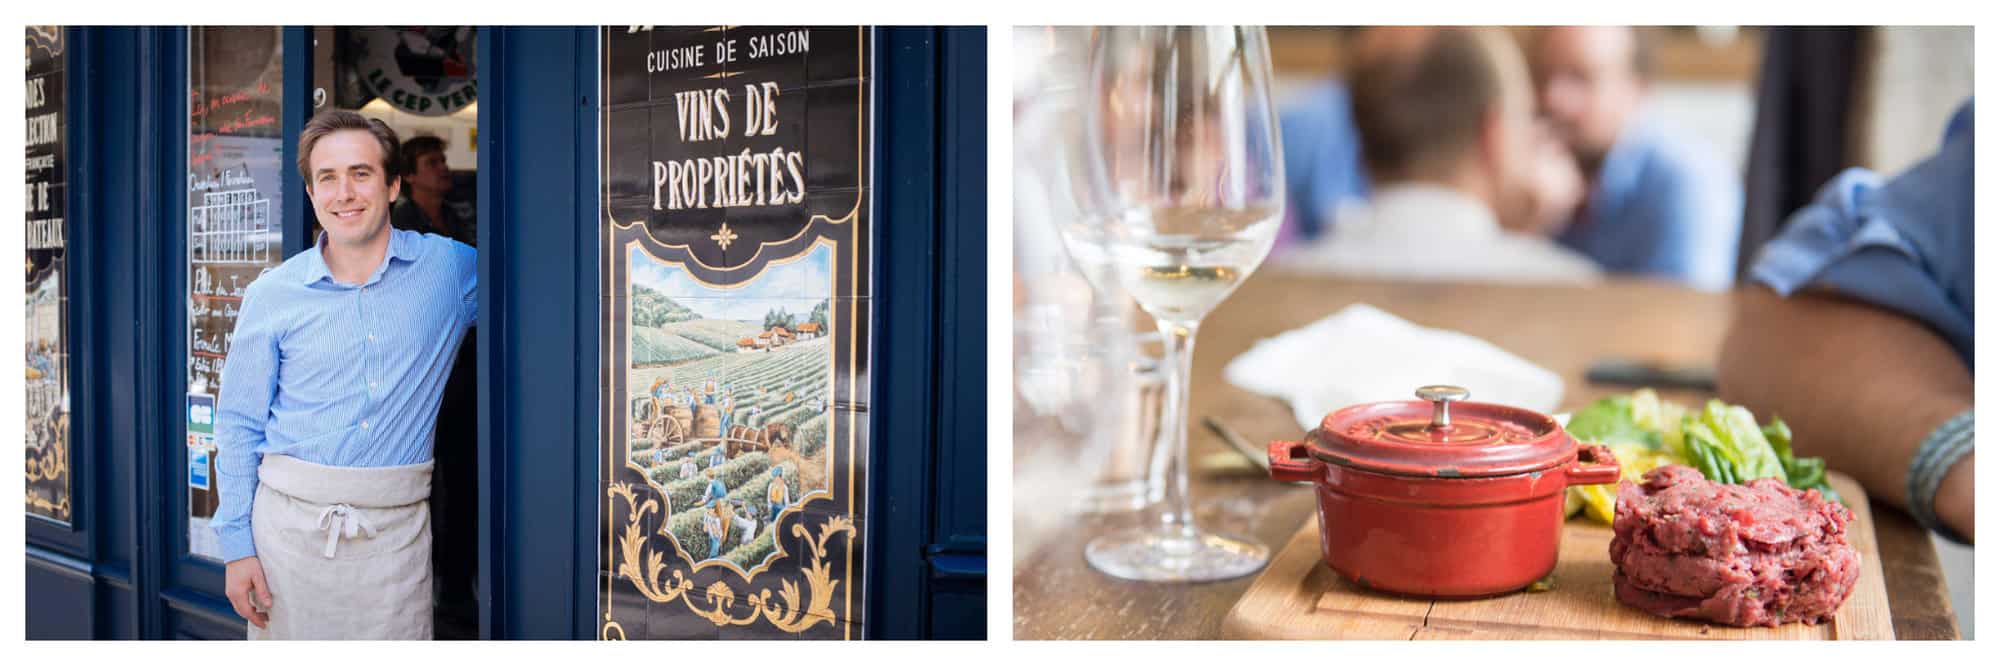 2 montages from the Parisian bistrot "Le Bon Georges". Left: The owner, Benoît Duval-Arnould, smiles and stands at the door of his restaurant in his bright blue shirt and gray apron. The exteriors of the restaurants are painted navy blue. Right: A close up of one of their menu, the Steak Tartare, served in a wooden board with salad on the side, a small red pot for the sauce, and a glass of white wine. On the background are male customers in blue shirt. 